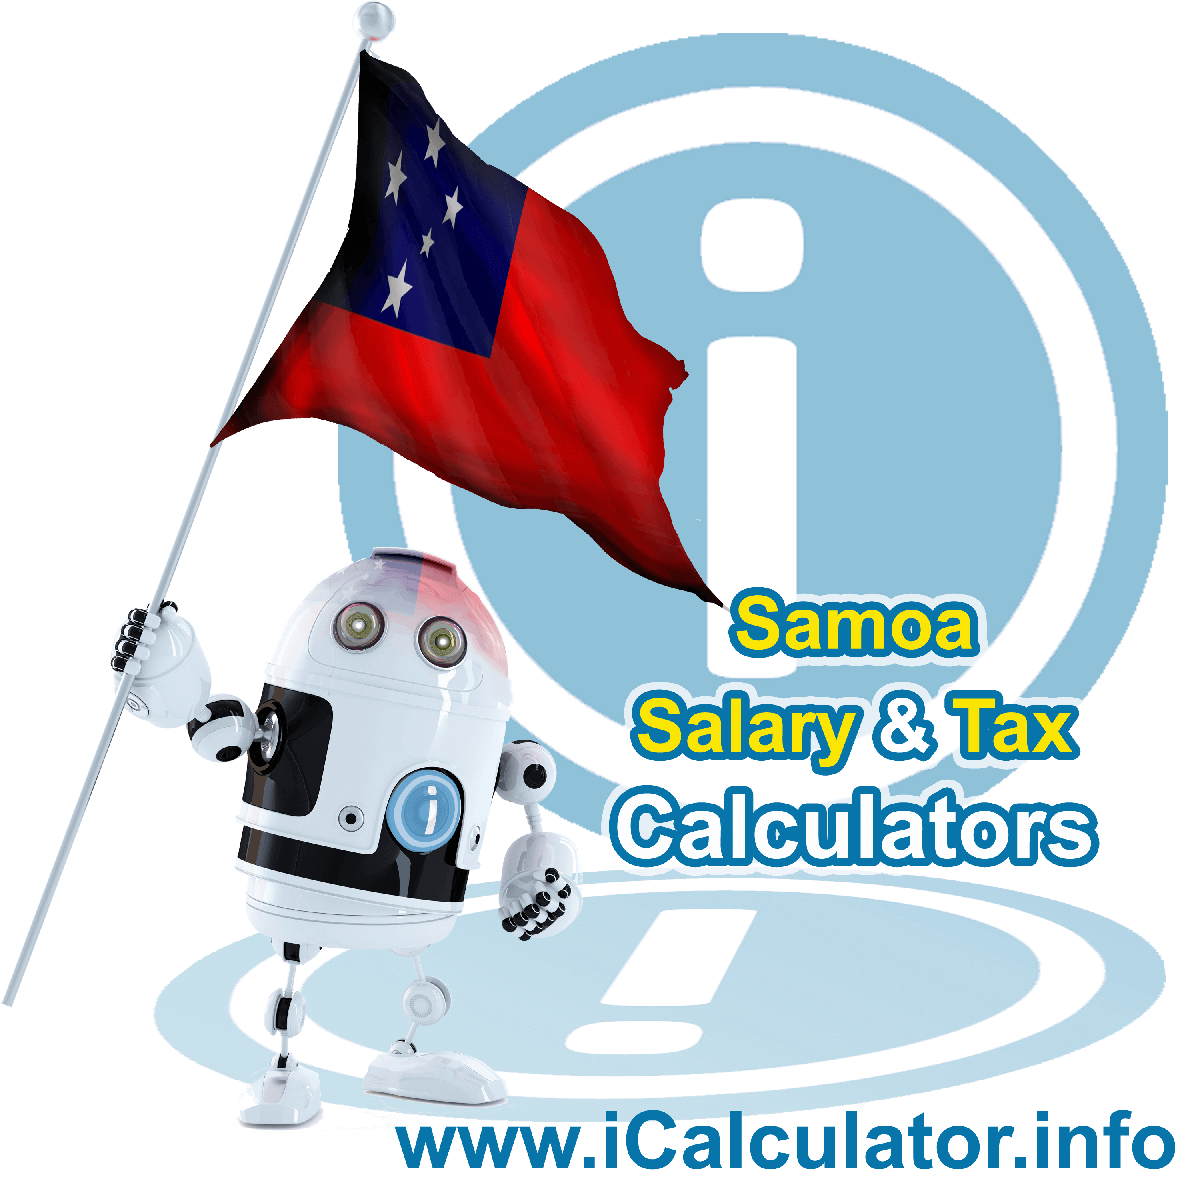 Samoa Wage Calculator. This image shows the Samoa flag and information relating to the tax formula for the Samoa Tax Calculator